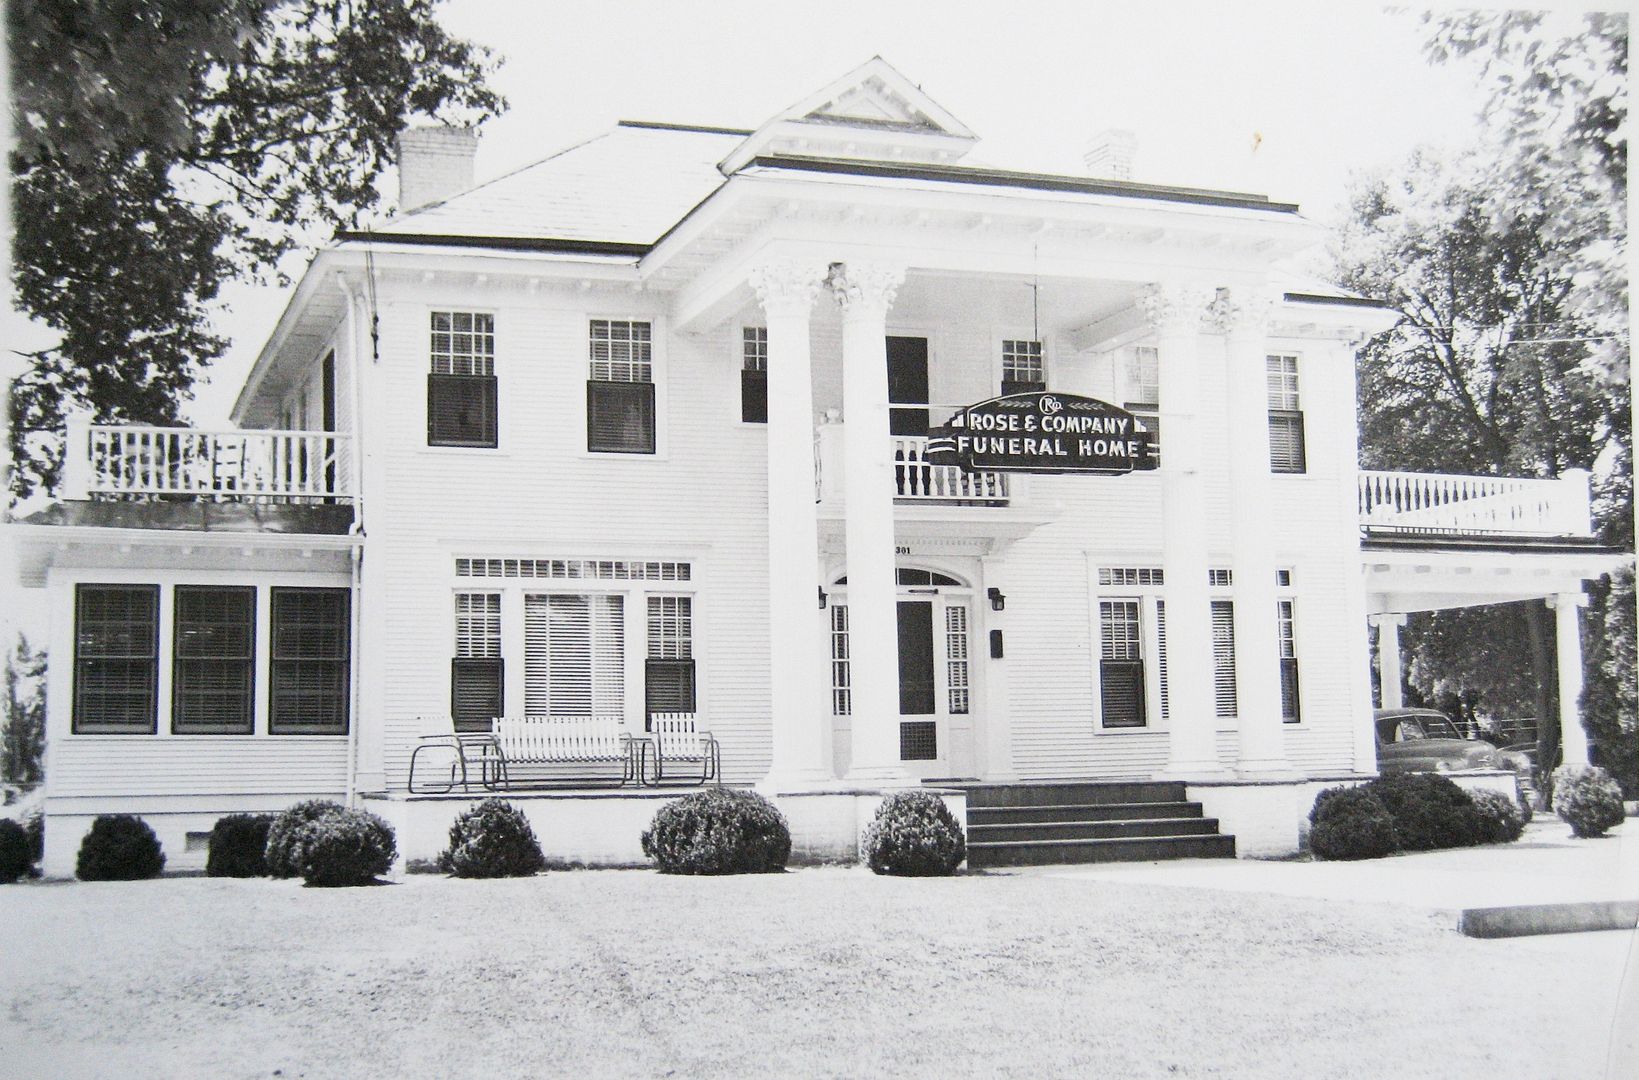 This Magnolia is in Benson, NC and the photo dates back to the late 1940s. This house has been in use as a funeral home for many decades. 